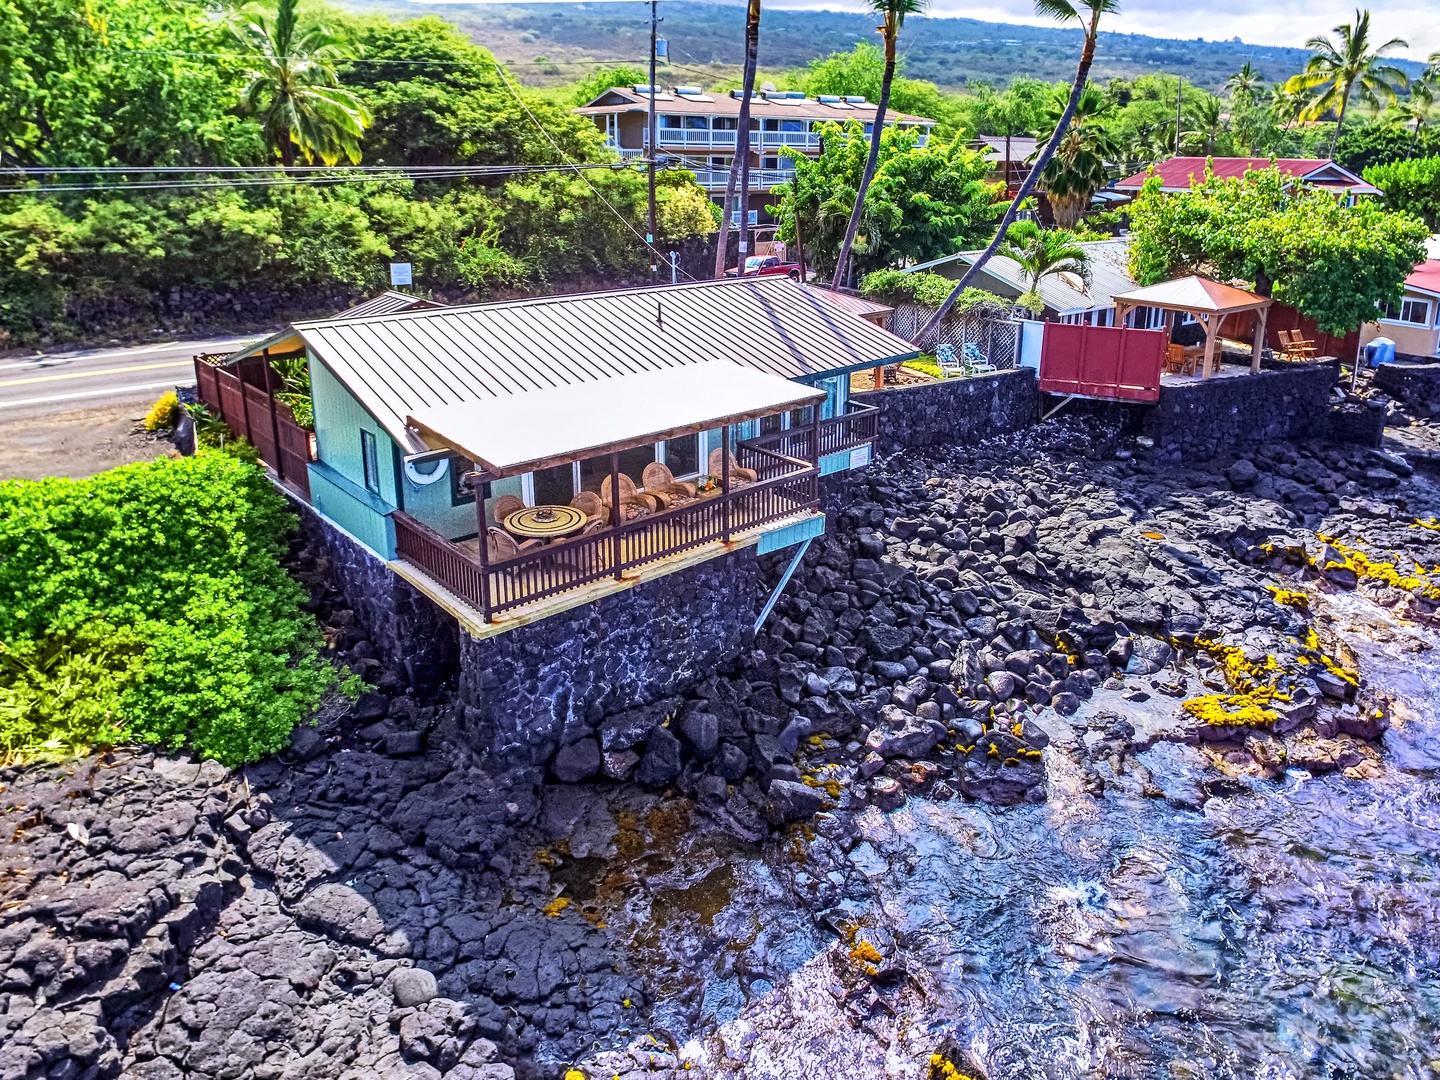 Kailua Kona Vacation Rentals, The Cottage - Breathtaking Ariel View of the Home